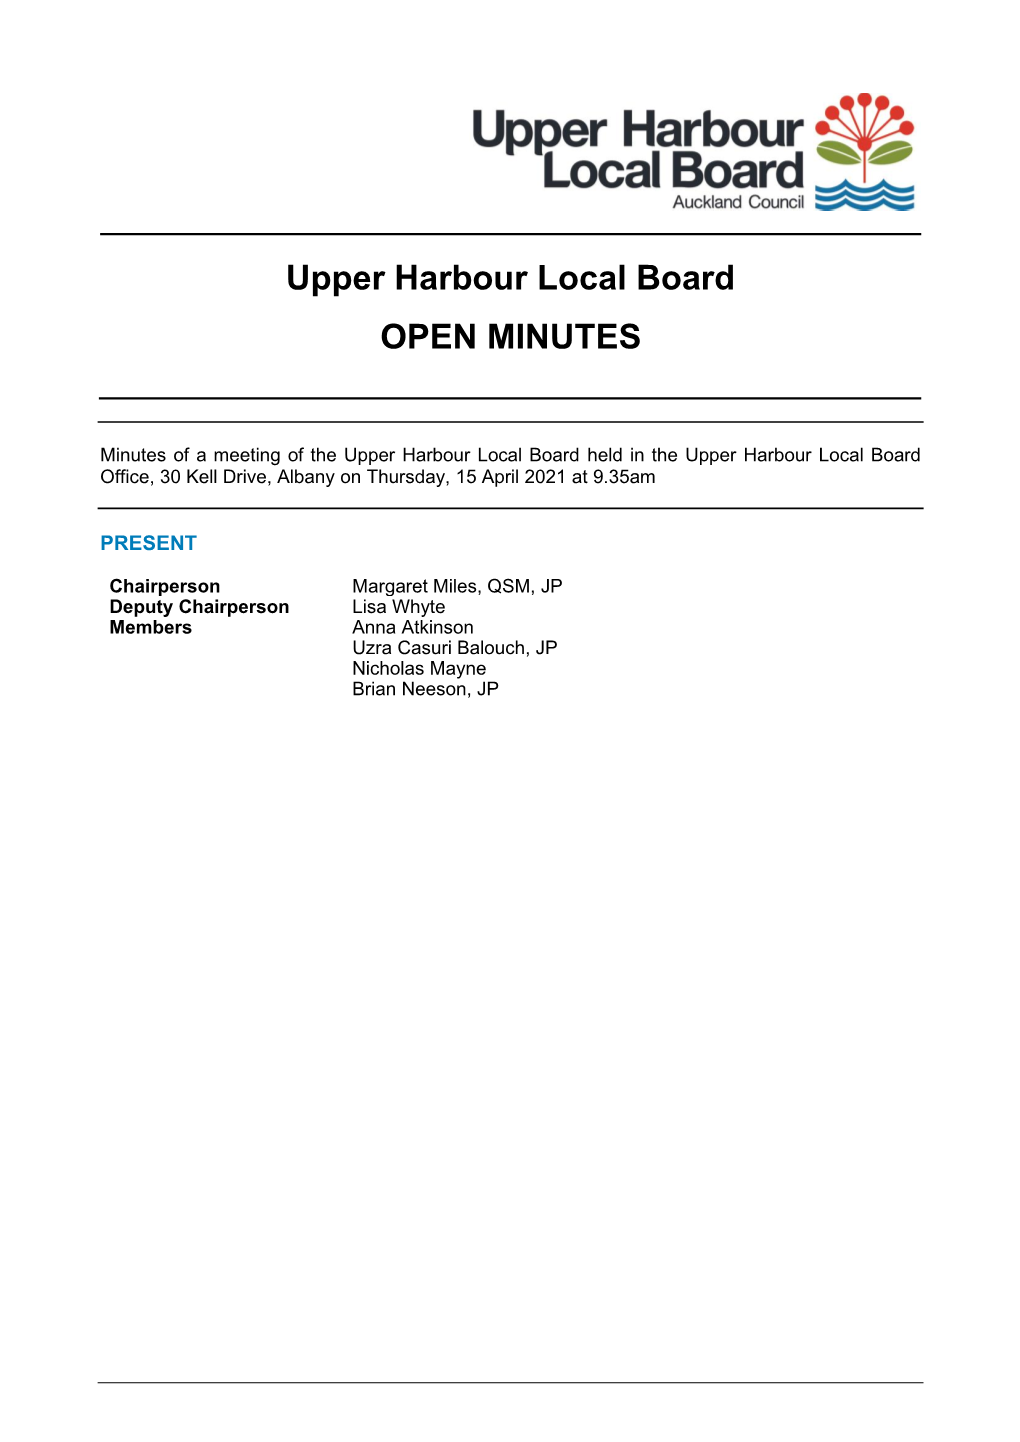 Minutes of Upper Harbour Local Board